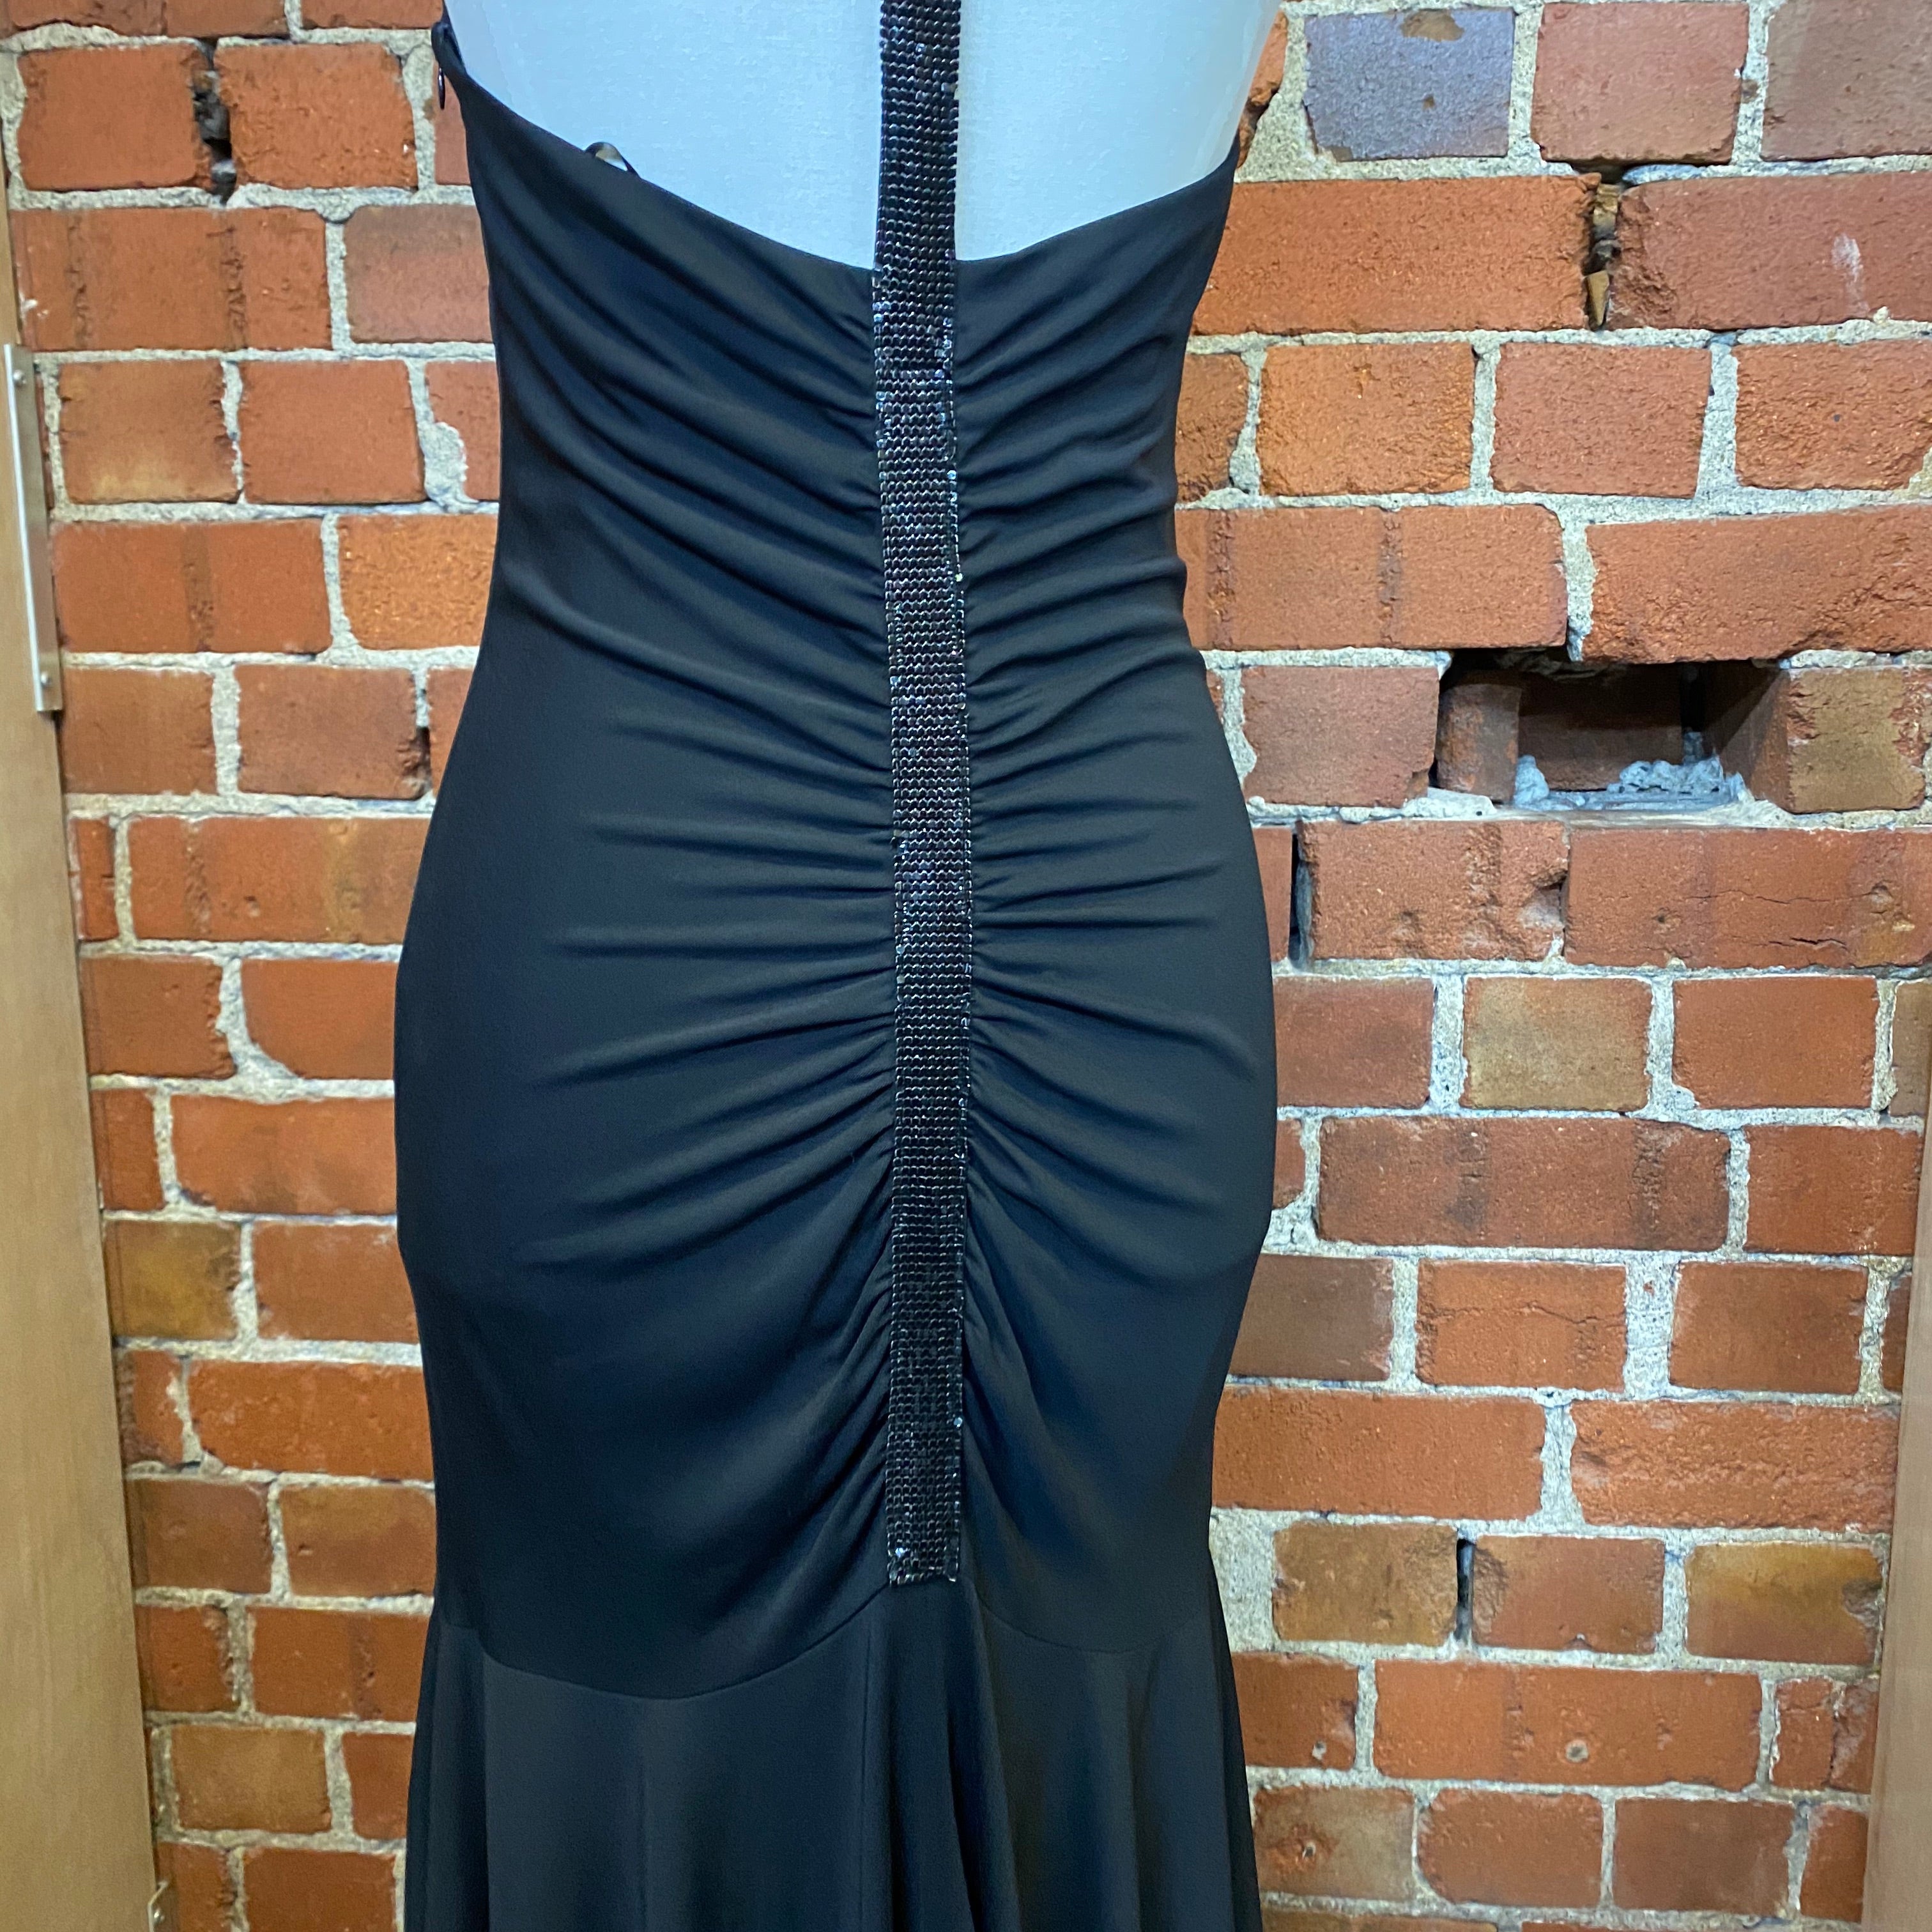 ABS Coture sexy ball gown